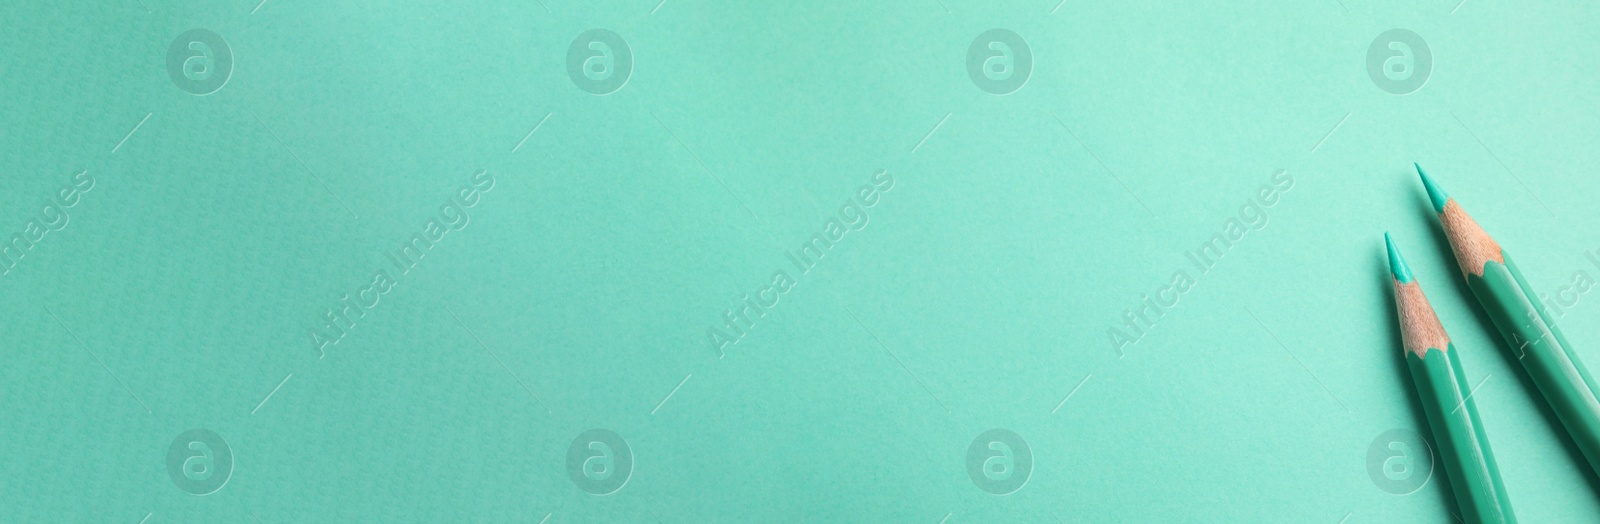 Image of Color pencils on turquoise background, flat lay with space for text. Banner design